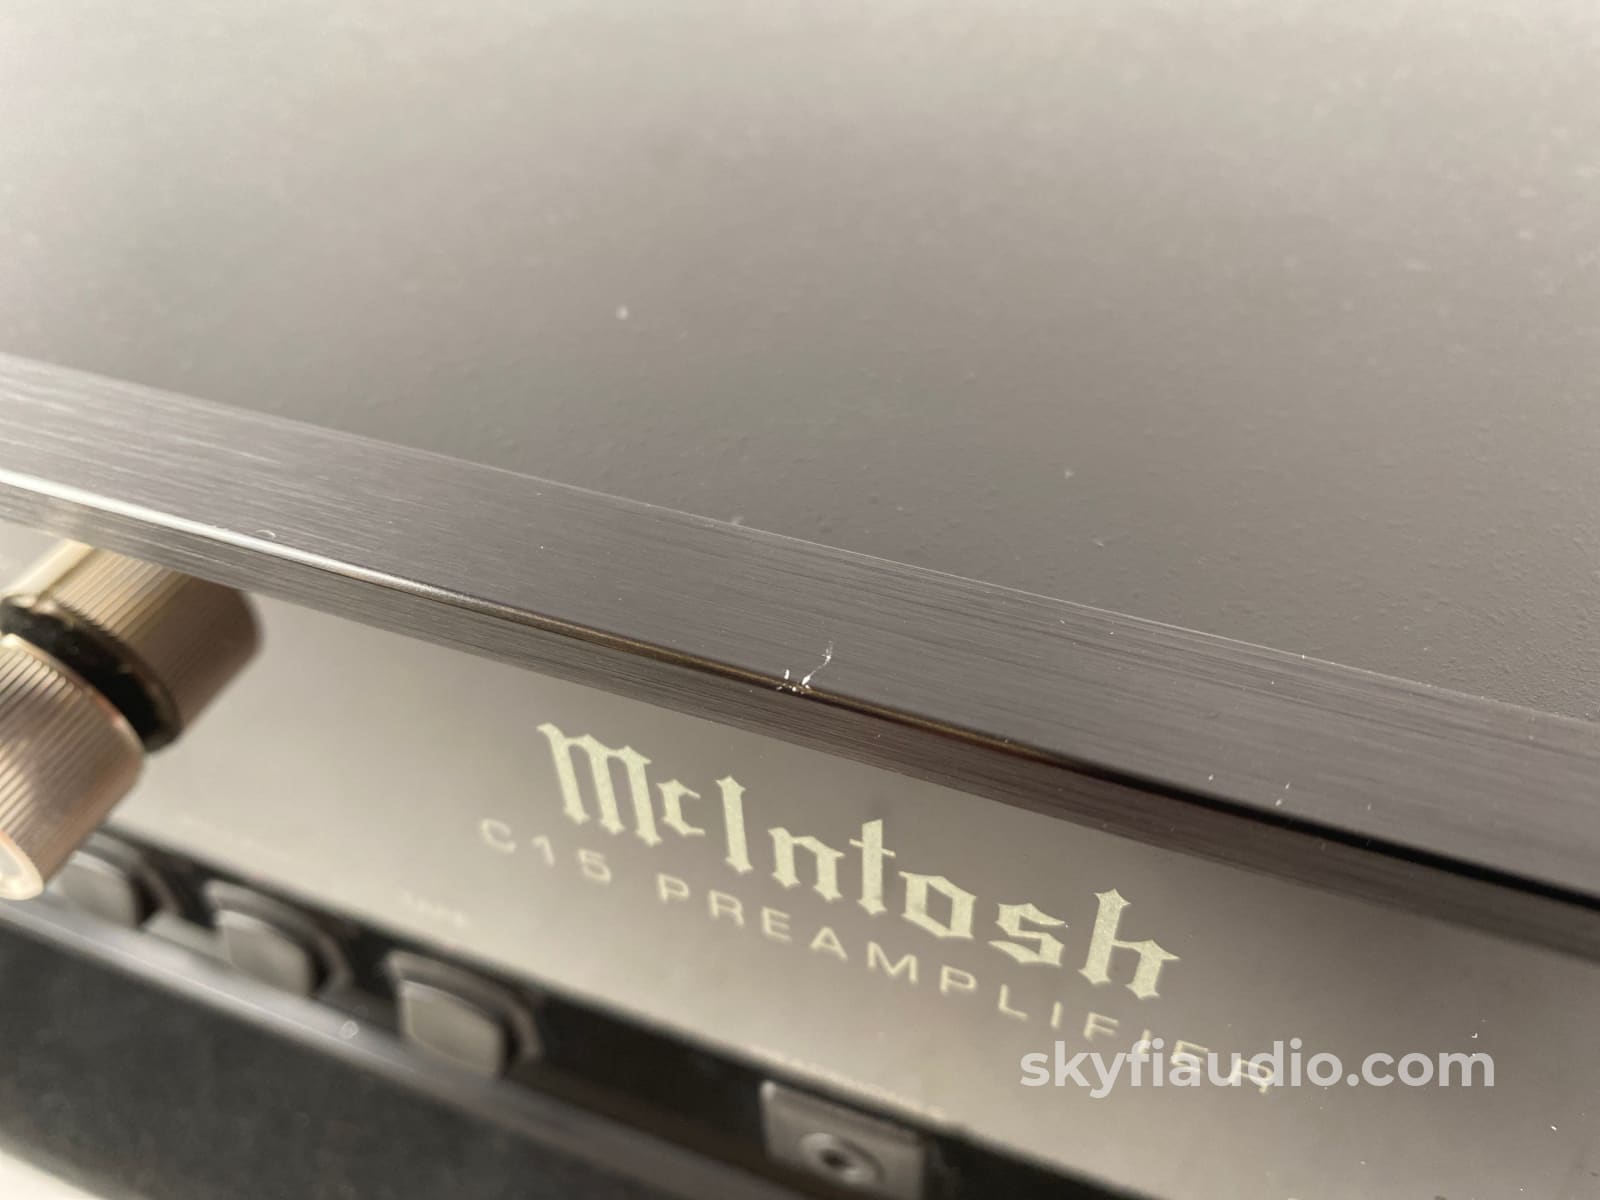 Mcintosh C15 Compact Preamplifier With Phono And Remote - Rare